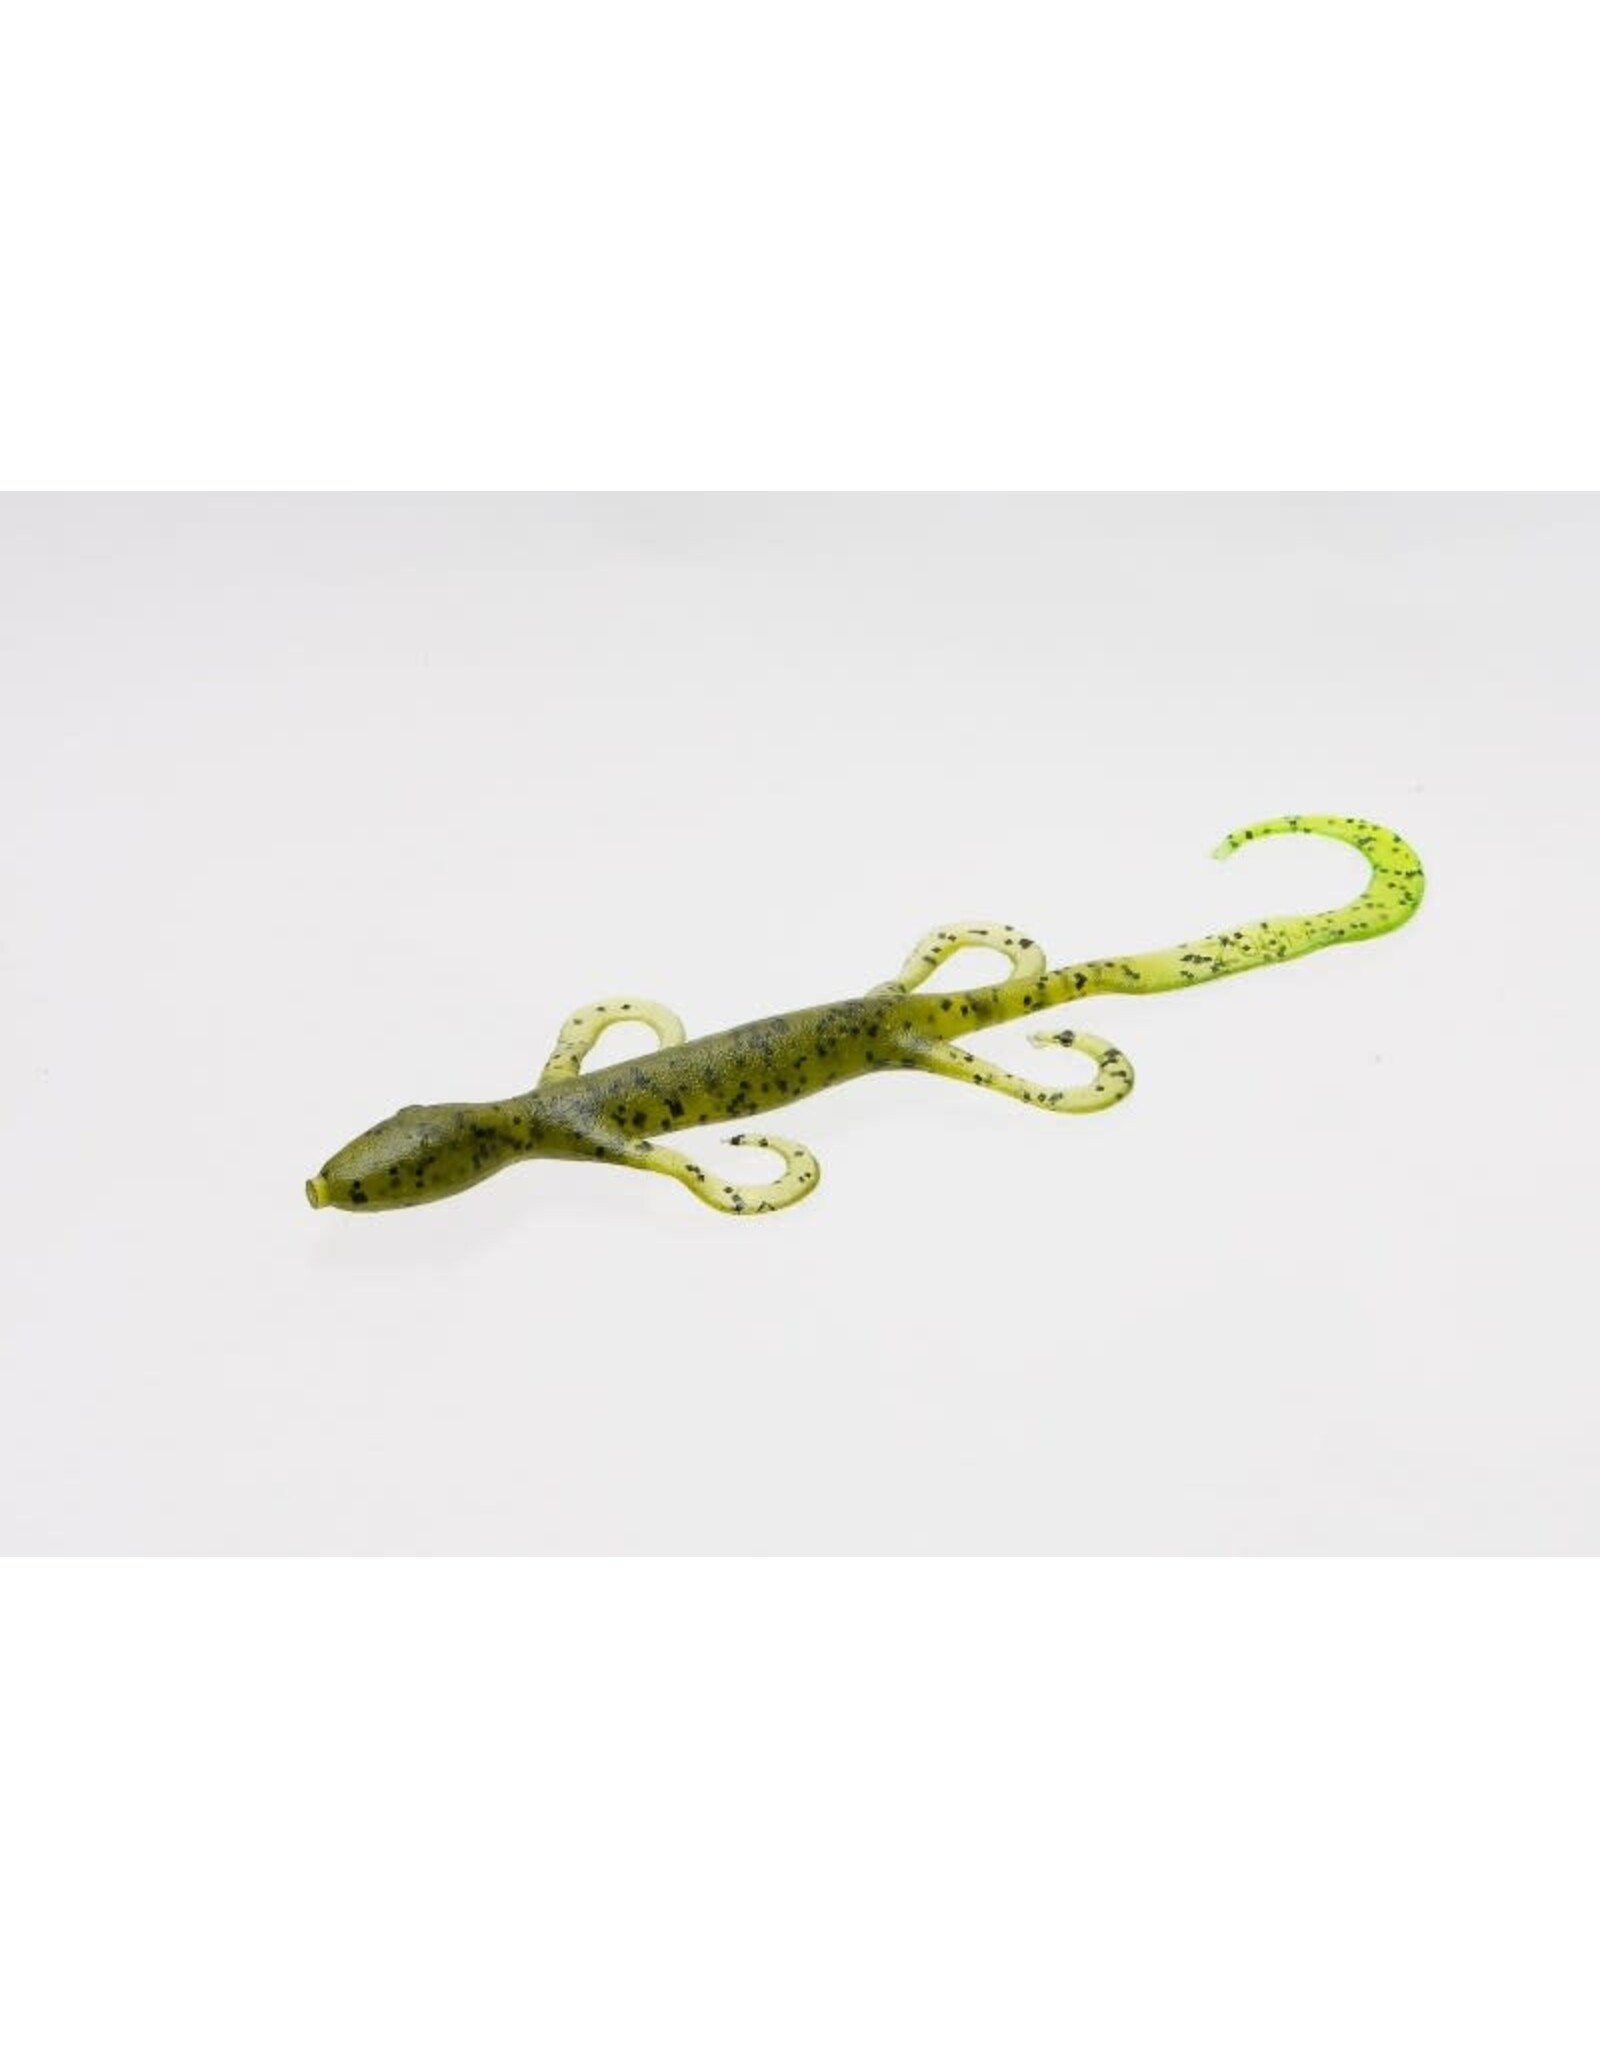 Zoom Bait Co. : Lizard - 6" - Watermelon Seed Chartreuse - 9 Count